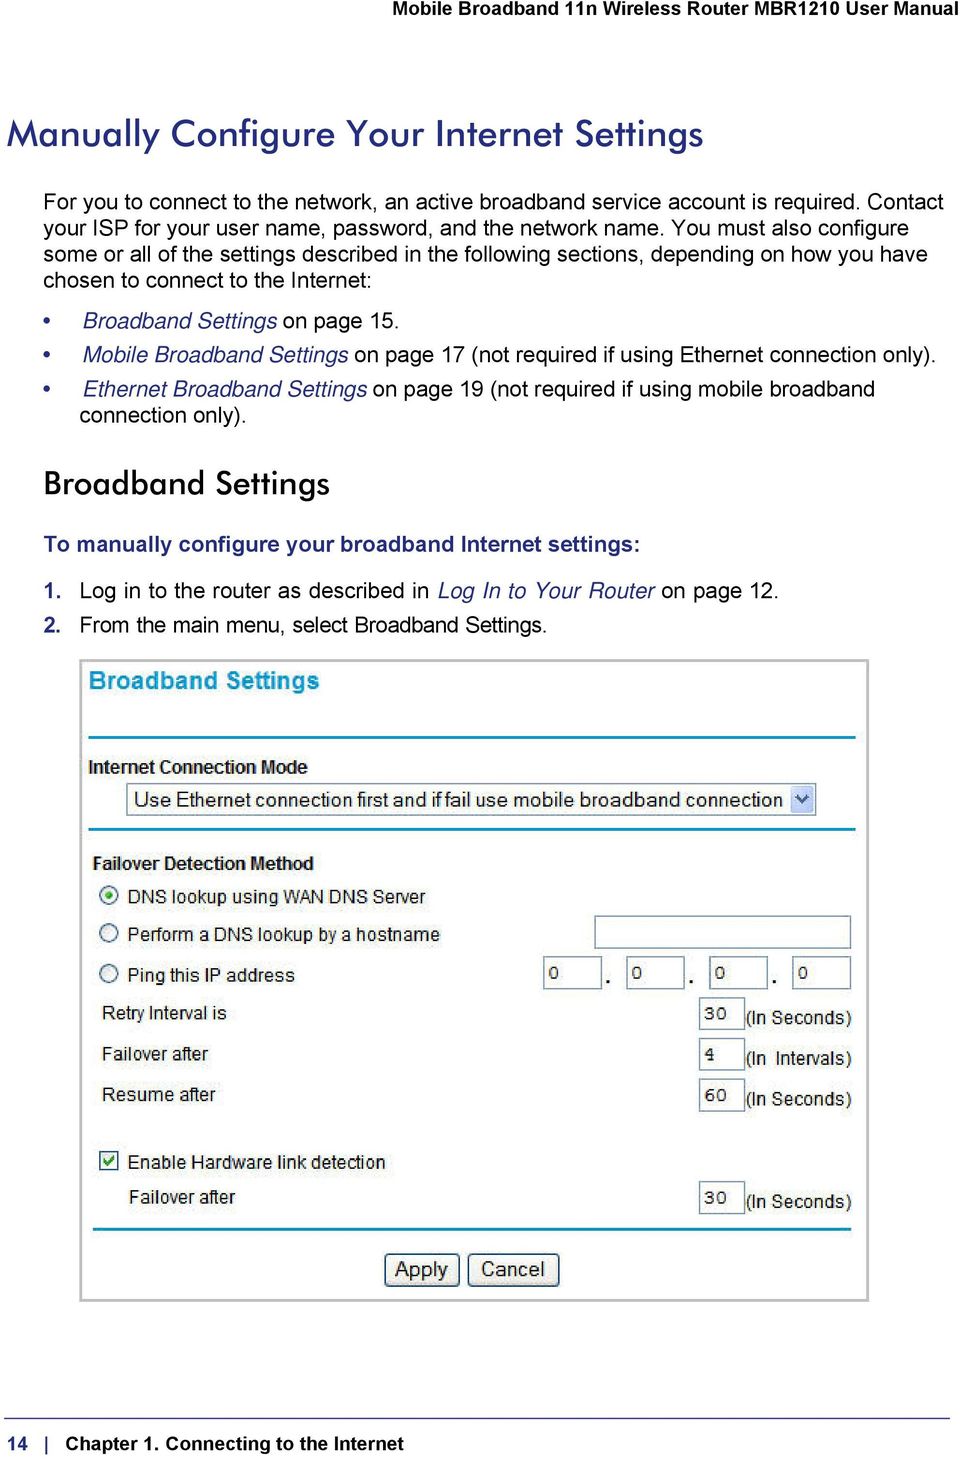 Mobile Broadband Settings on page 17 (not required if using Ethernet connection only). Ethernet Broadband Settings on page 19 (not required if using mobile broadband connection only).